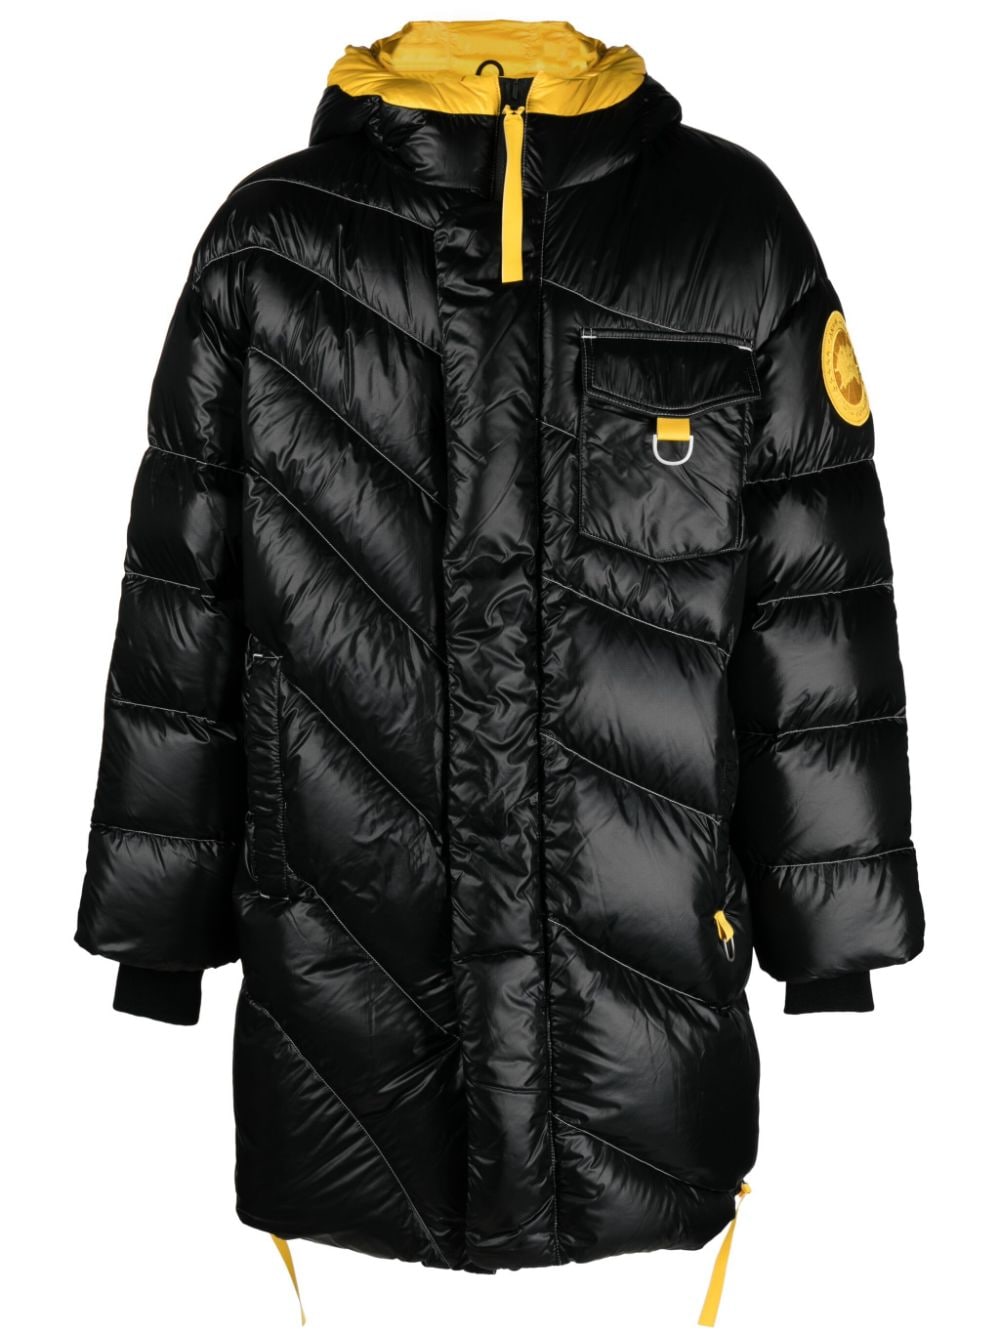 Canada Goose x Pyer Moss hooded quilted down coat - Black von Canada Goose